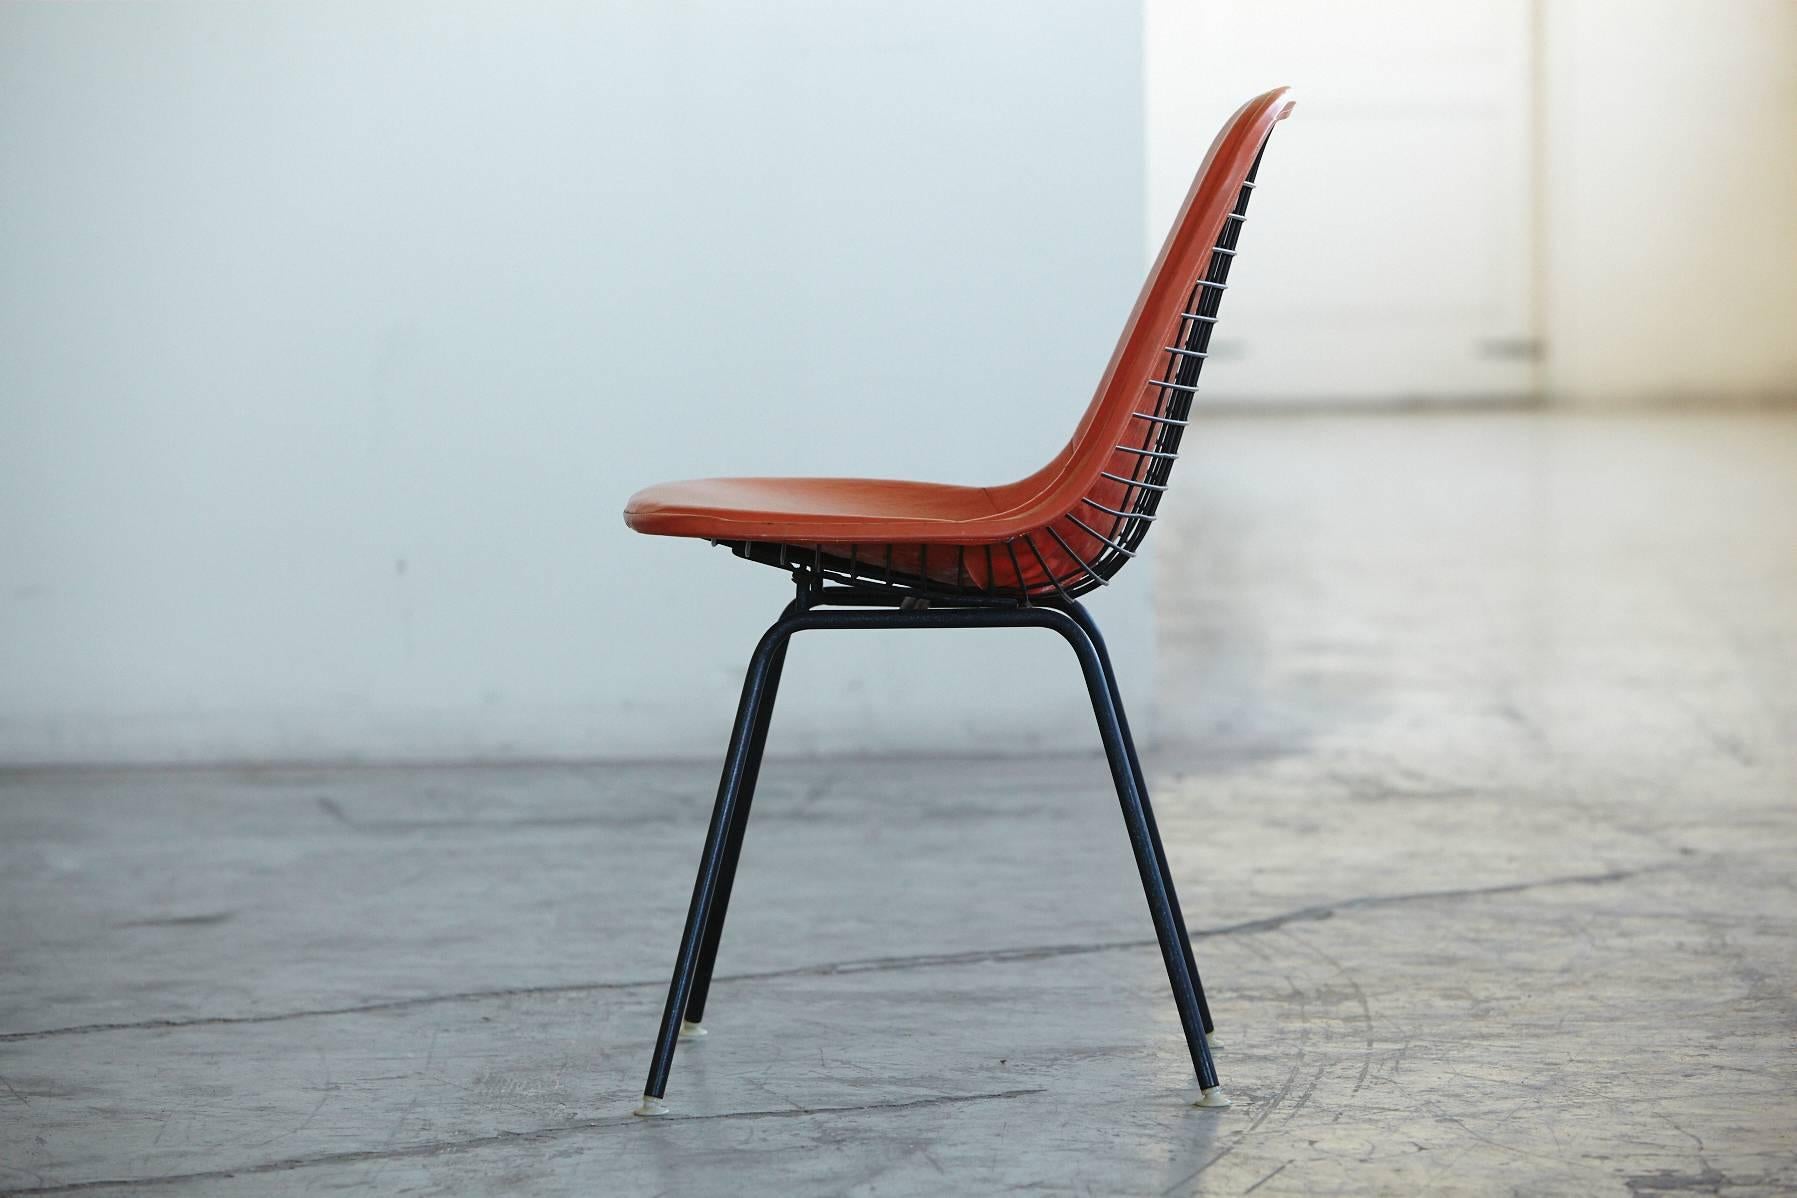 American Original Eames DKX-1 Side Chair in Orange Leather for Herman Miller, 1960s For Sale